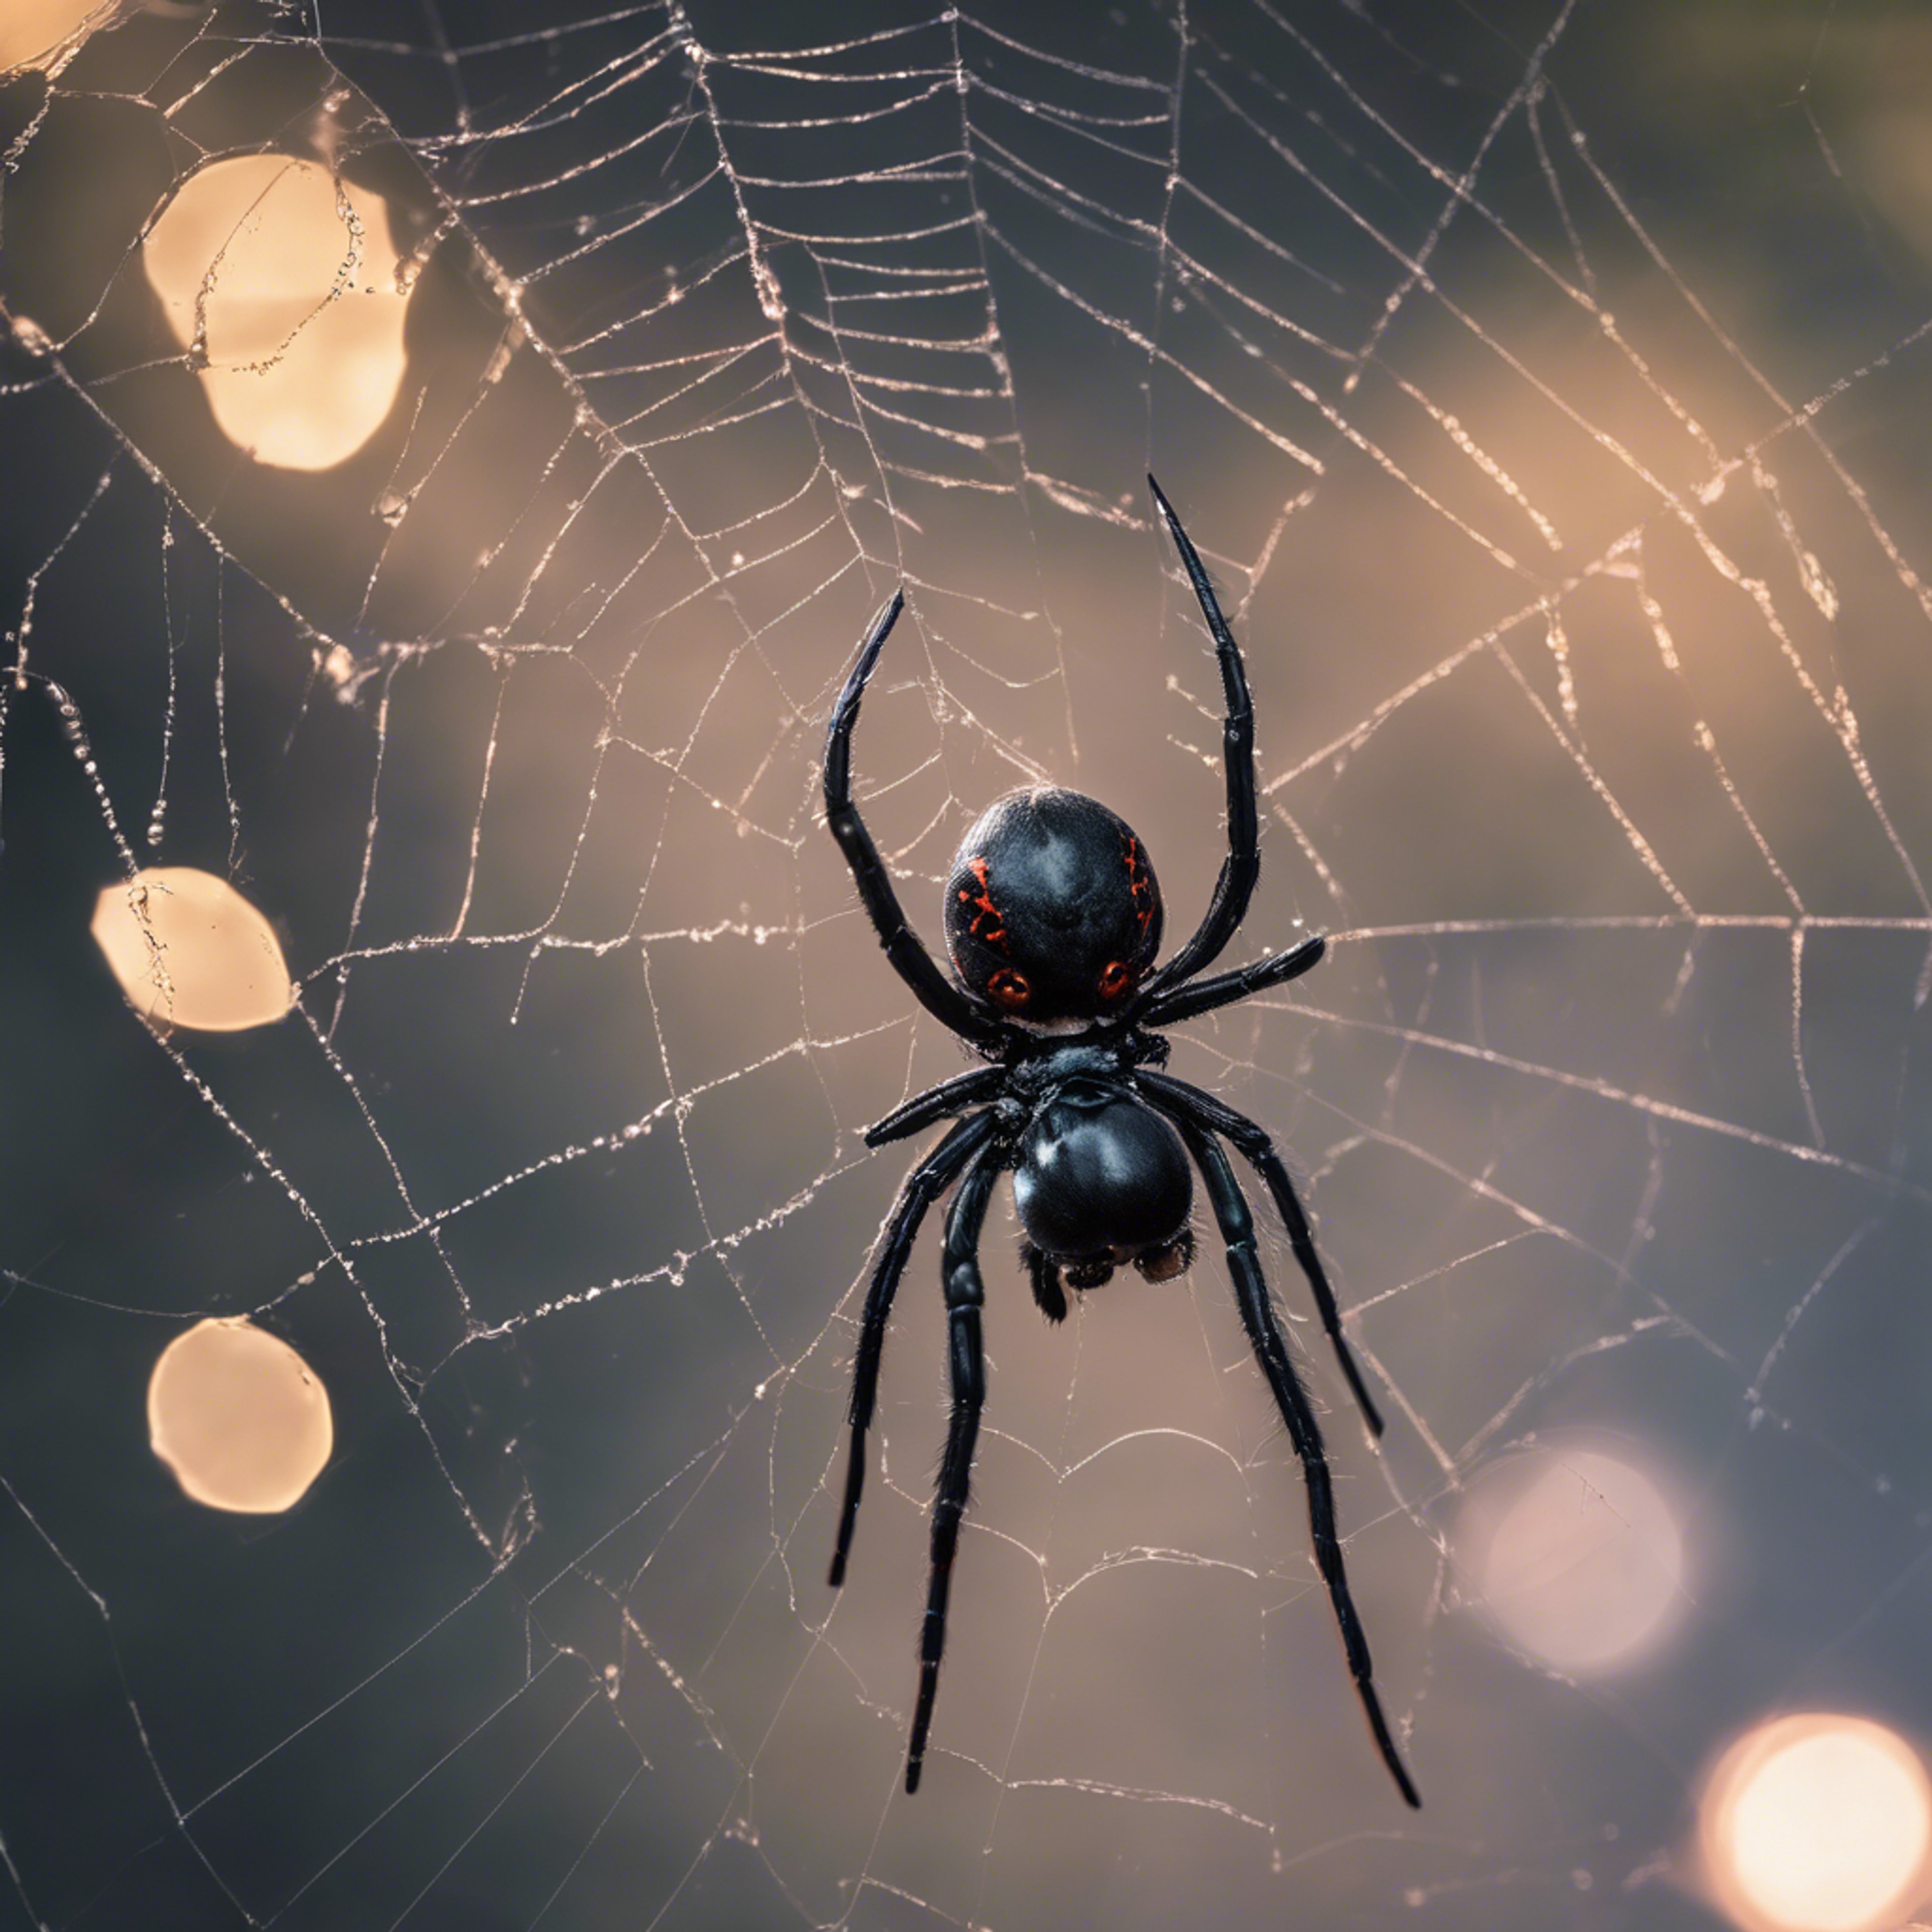 A pastel gothic black widow spider spinning a beautiful web in the moonlight.壁紙[f9bccbf1134347bf9511]